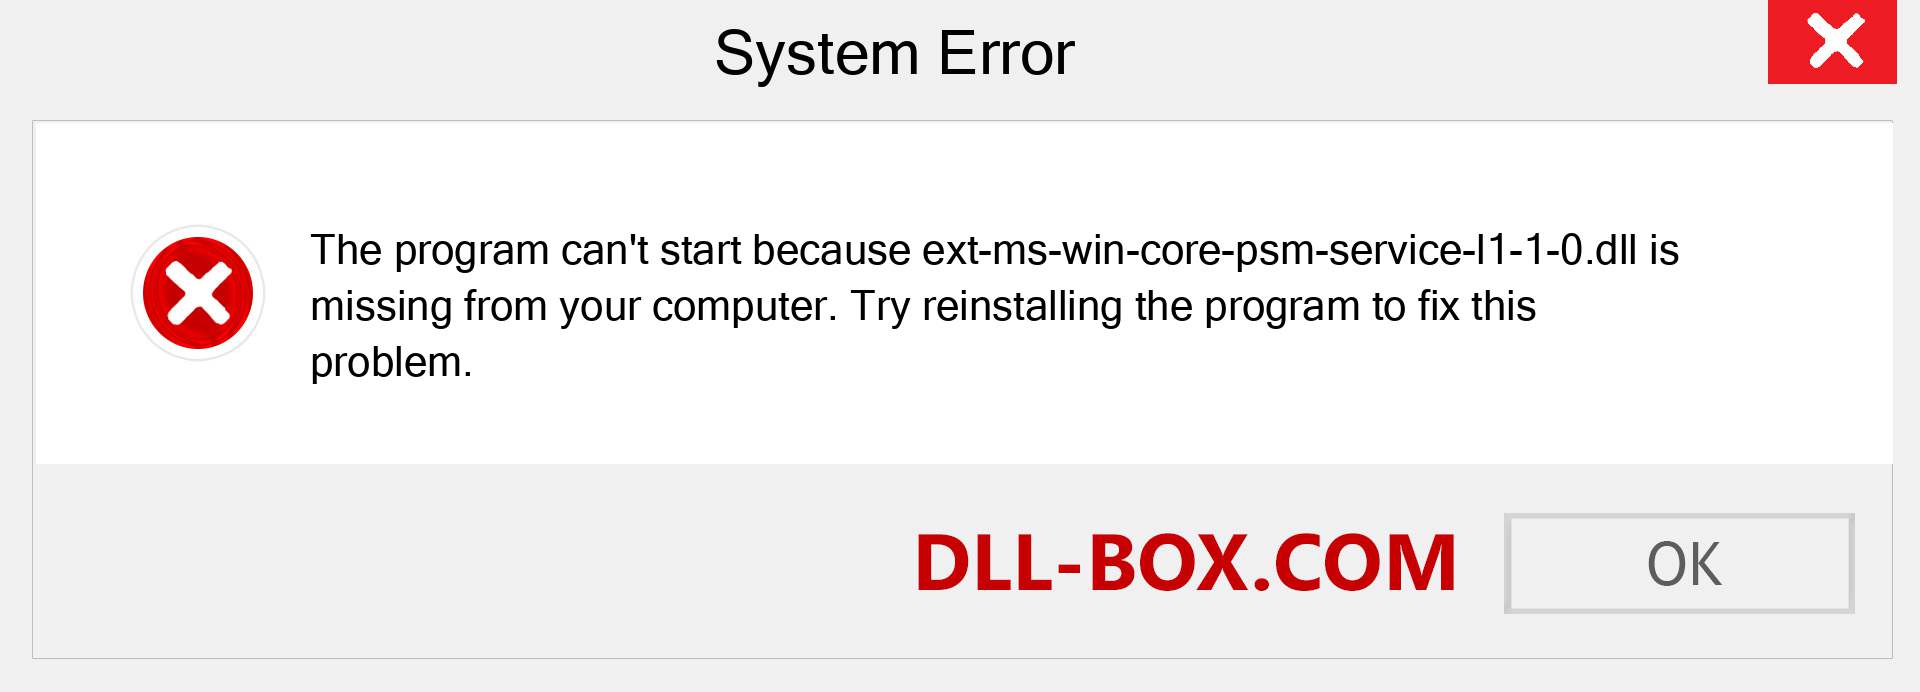  ext-ms-win-core-psm-service-l1-1-0.dll file is missing?. Download for Windows 7, 8, 10 - Fix  ext-ms-win-core-psm-service-l1-1-0 dll Missing Error on Windows, photos, images